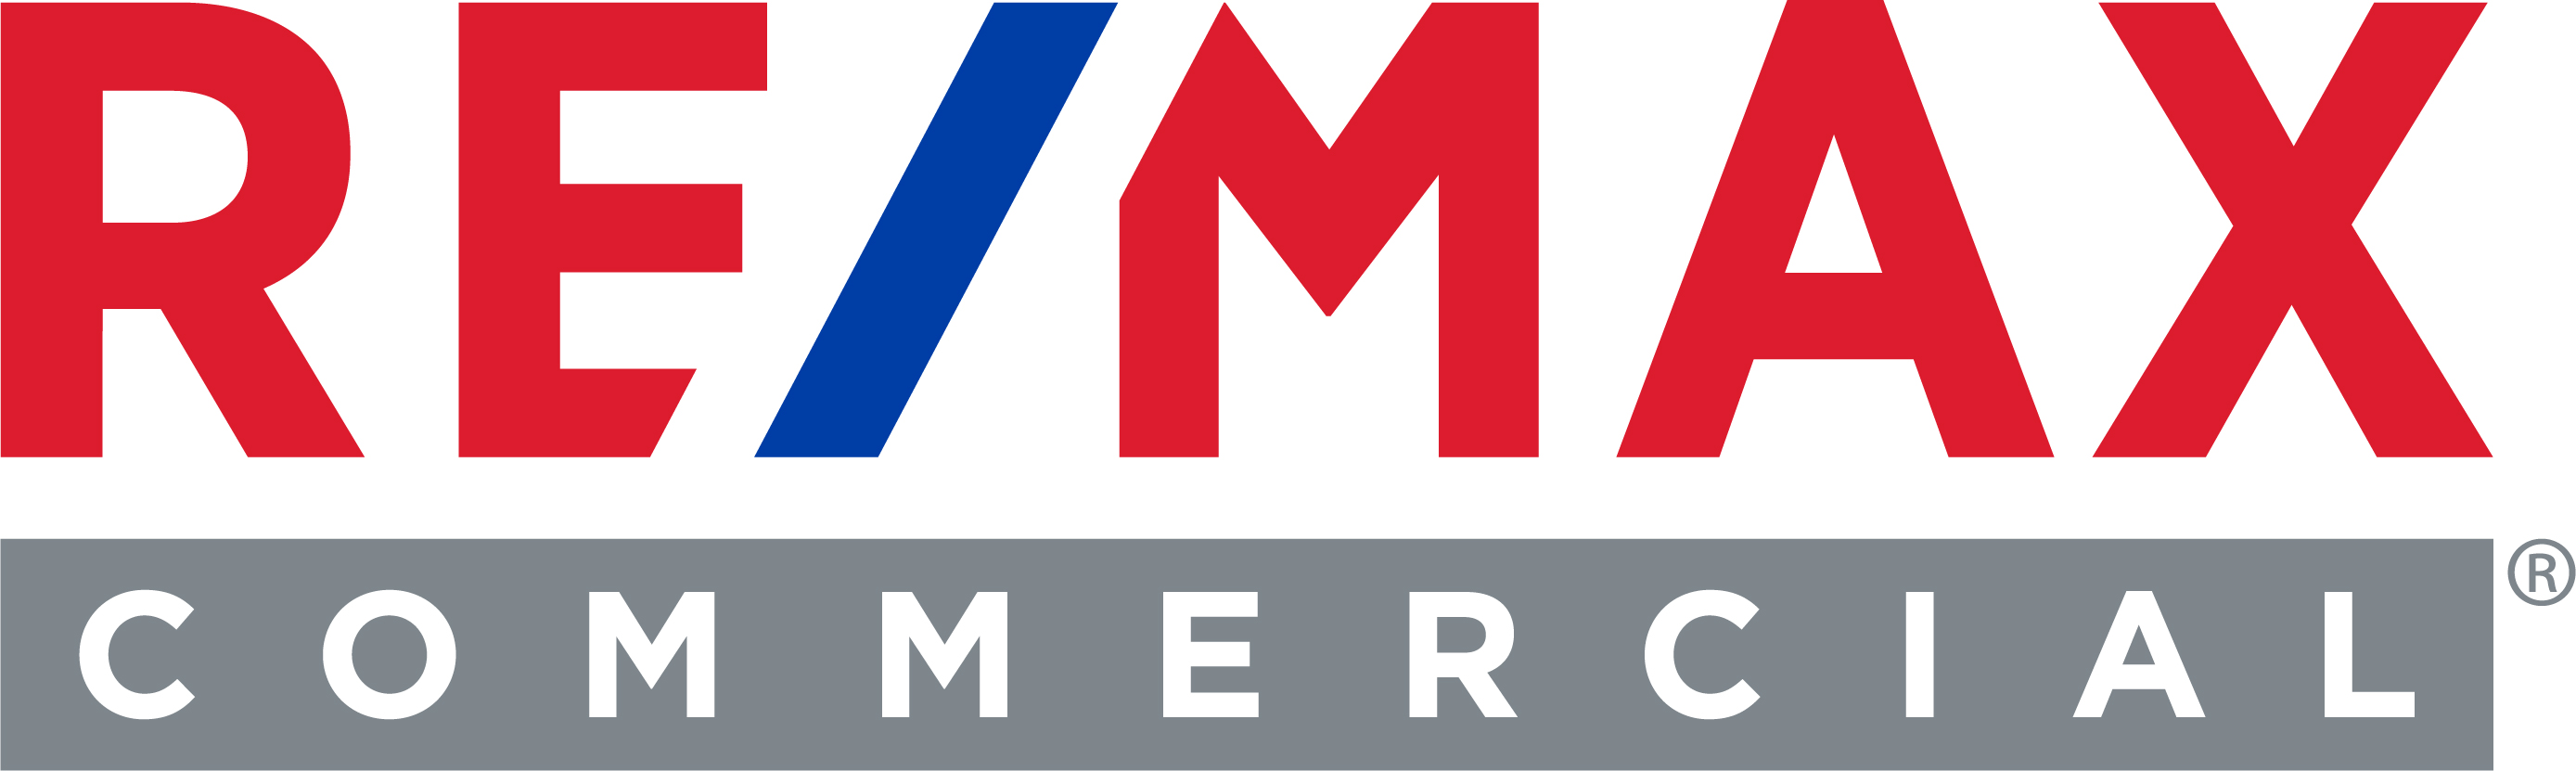 ReMax Commercial Real Estate